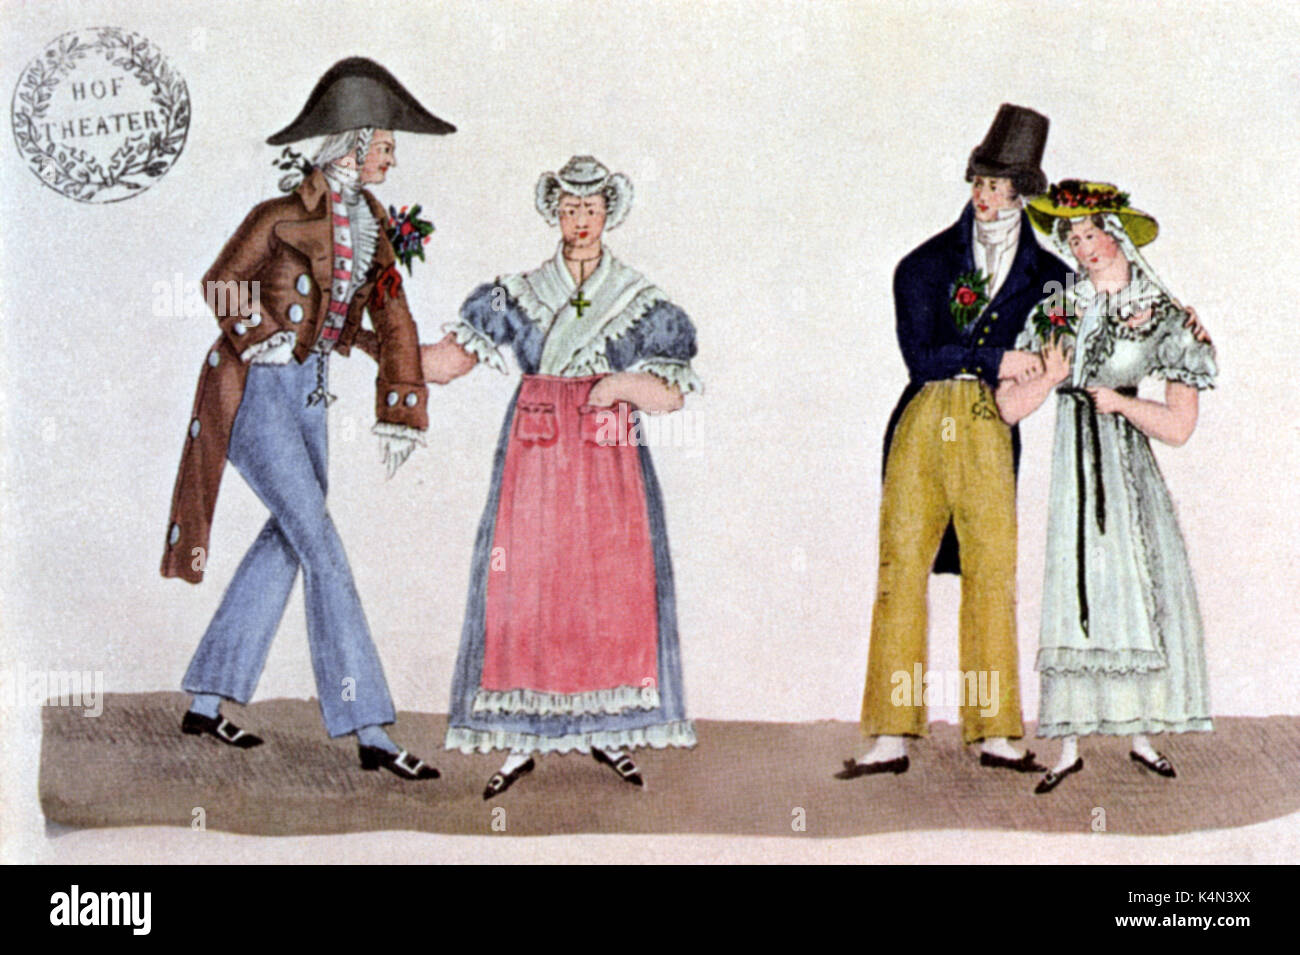 AUBER - LE MACON/MAURER UND SCHLOFFER Costume design by K A Ritter, 1827  for Daniel Auber's Opera, 'Le Macon' (the mason). at Brunswiick Opera House  French Composer, 1782-1871 Stock Photo - Alamy